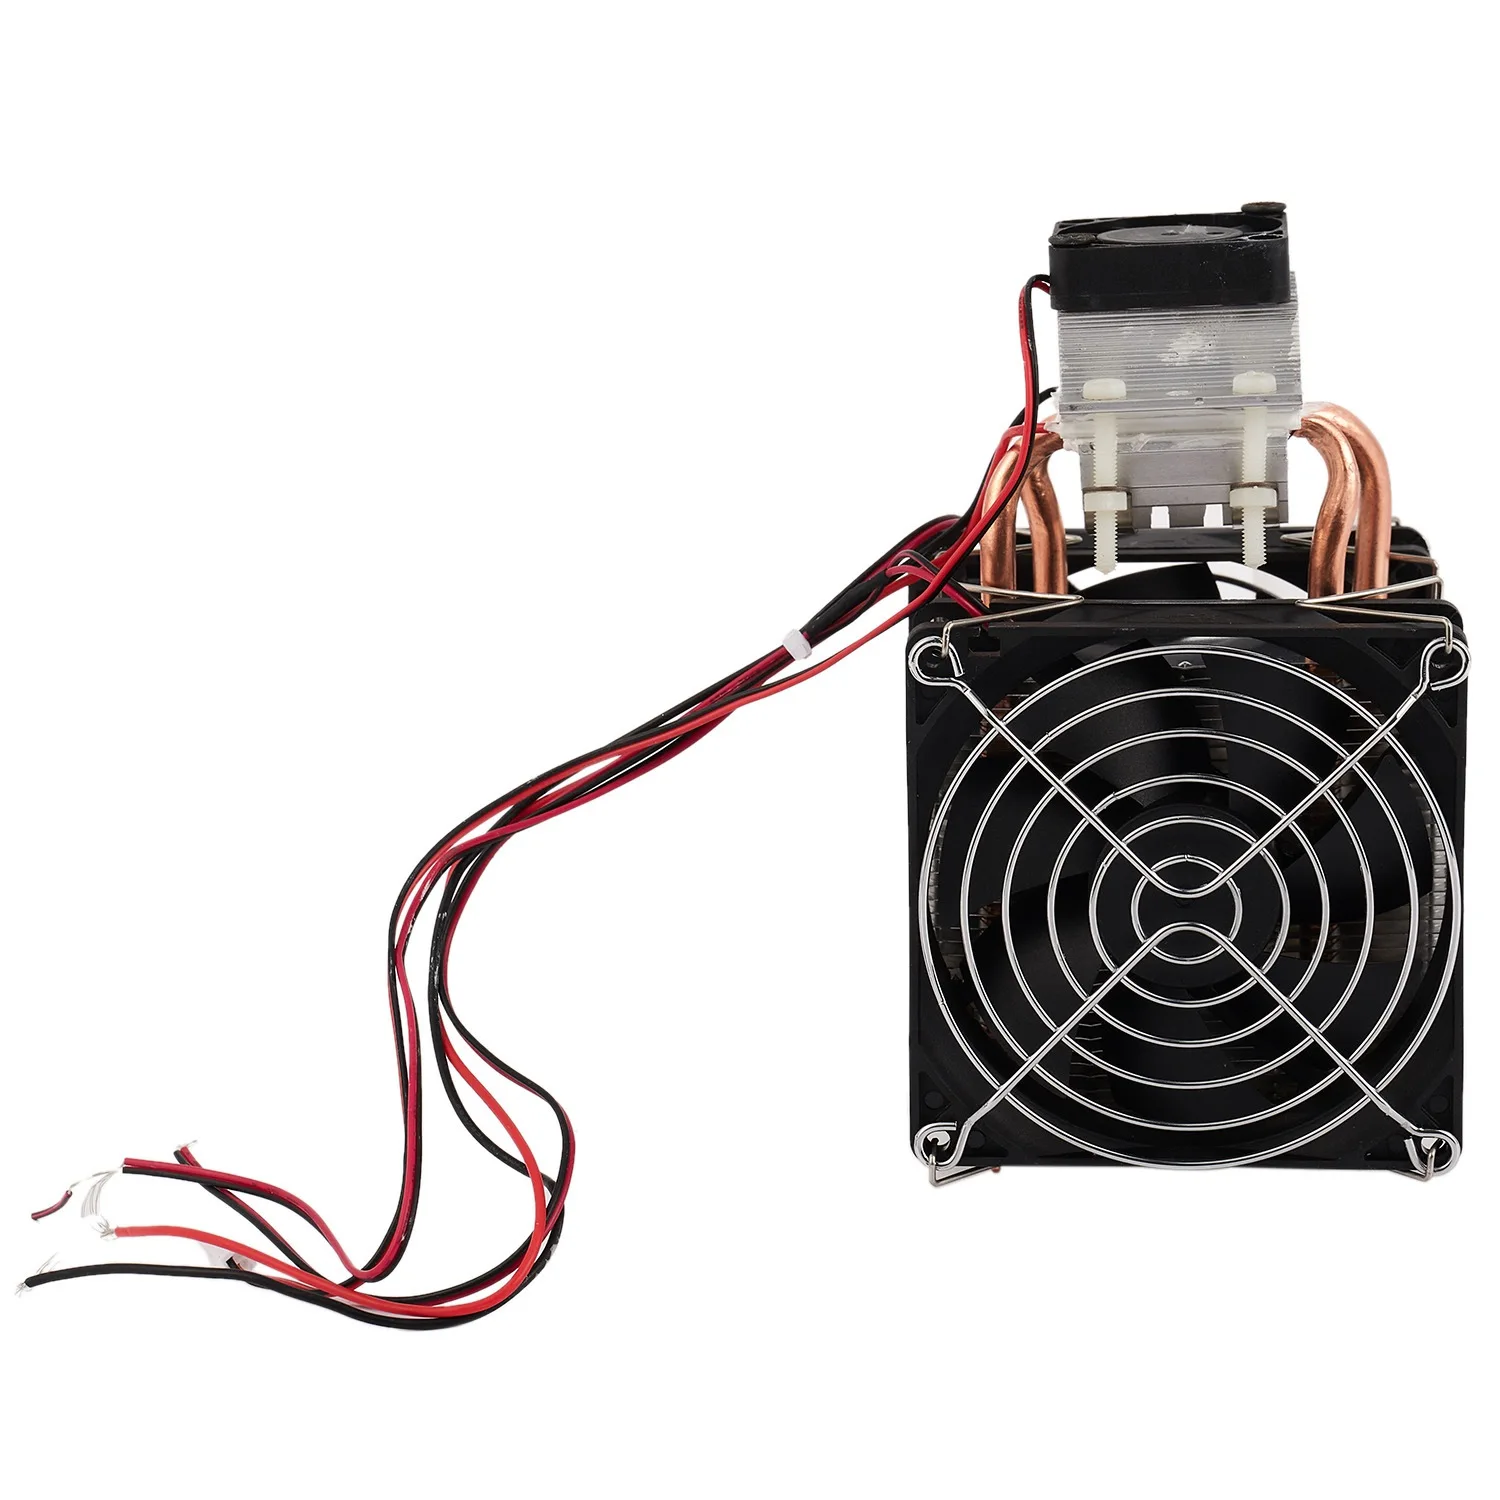 

12V 6A Thermoelectric Peltier Semiconductor Cooler Refrigeration Cooling System Kit Cooler Fan For Air Cooling